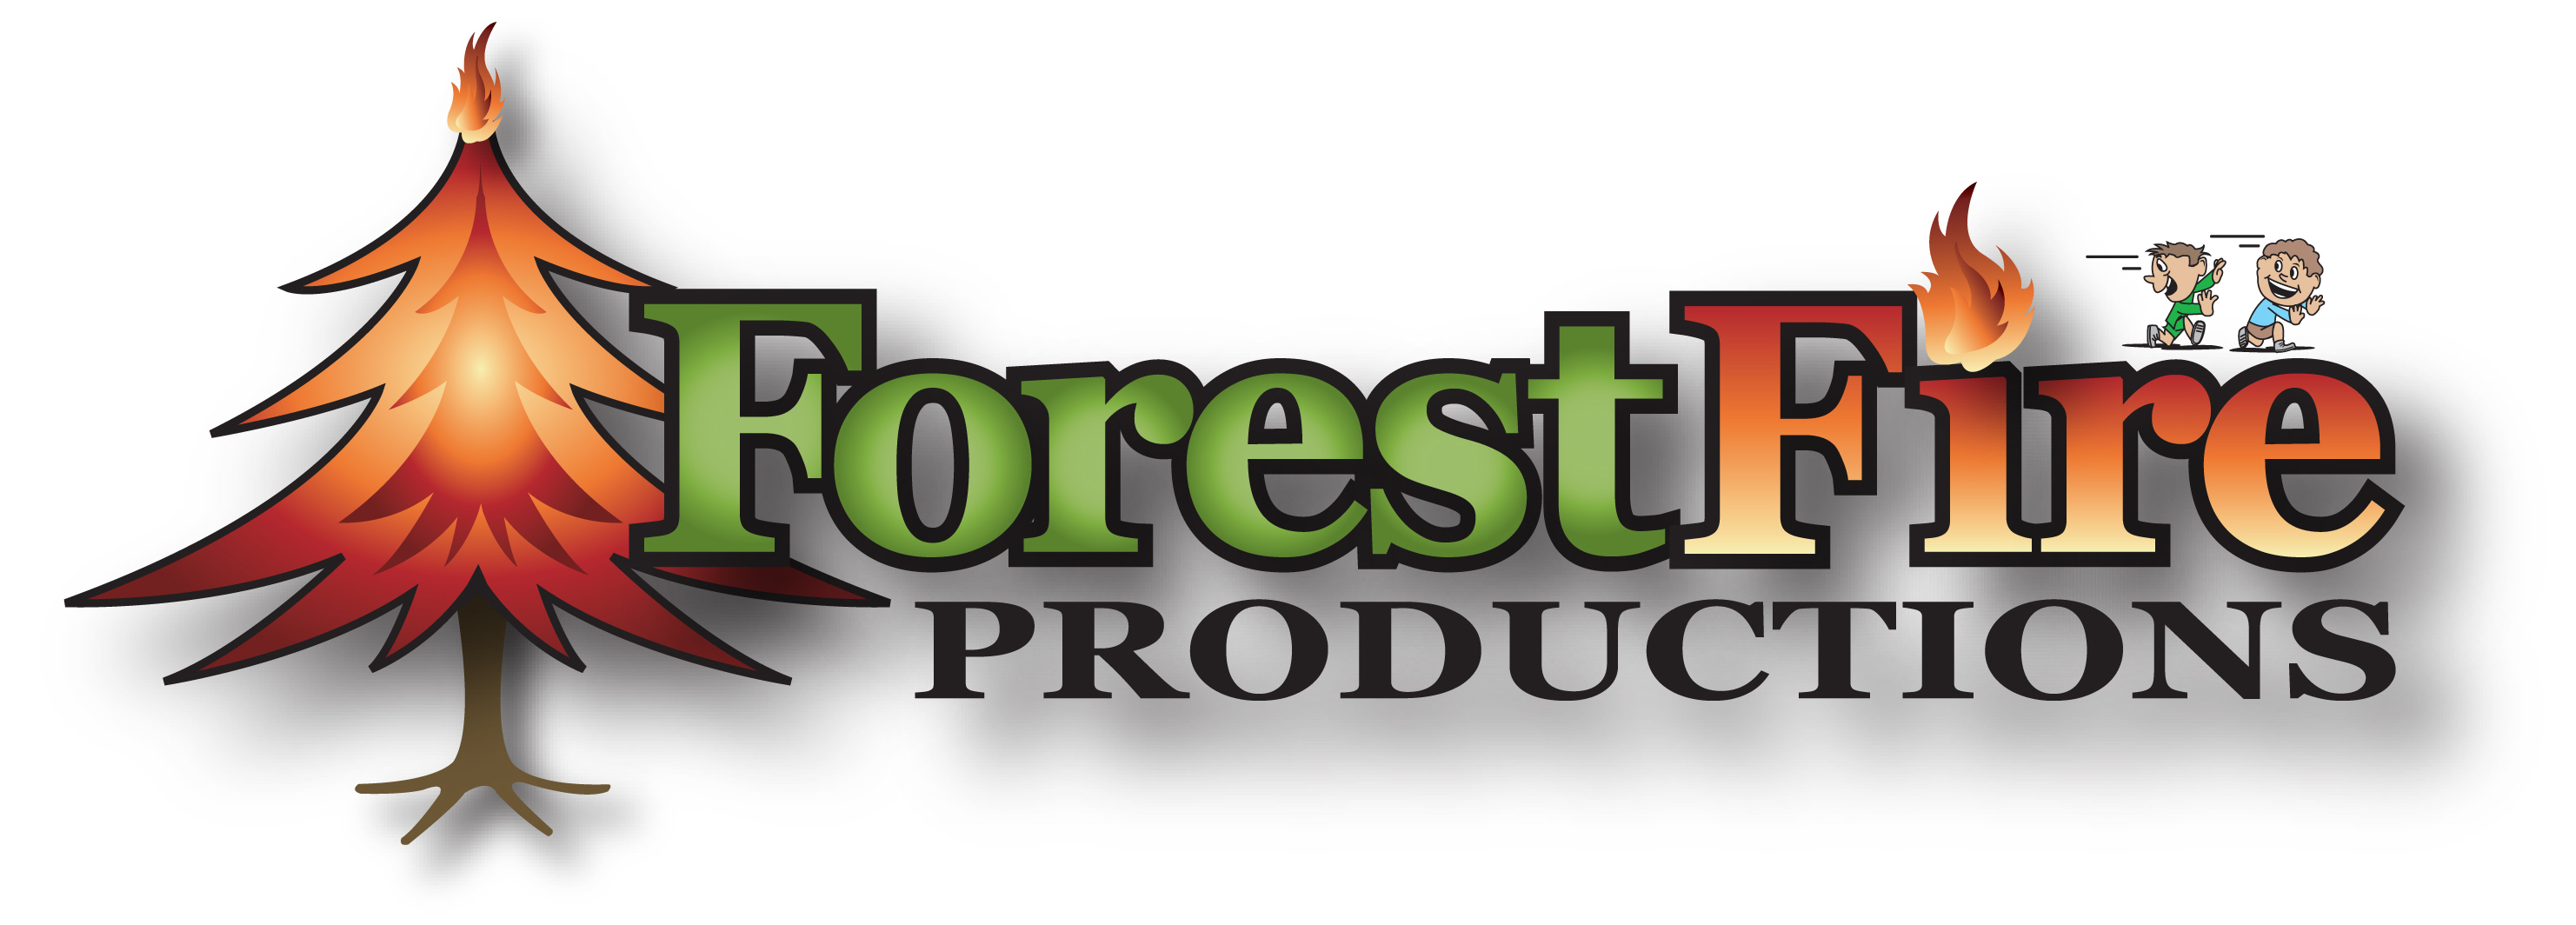 Forest Fire Productions 